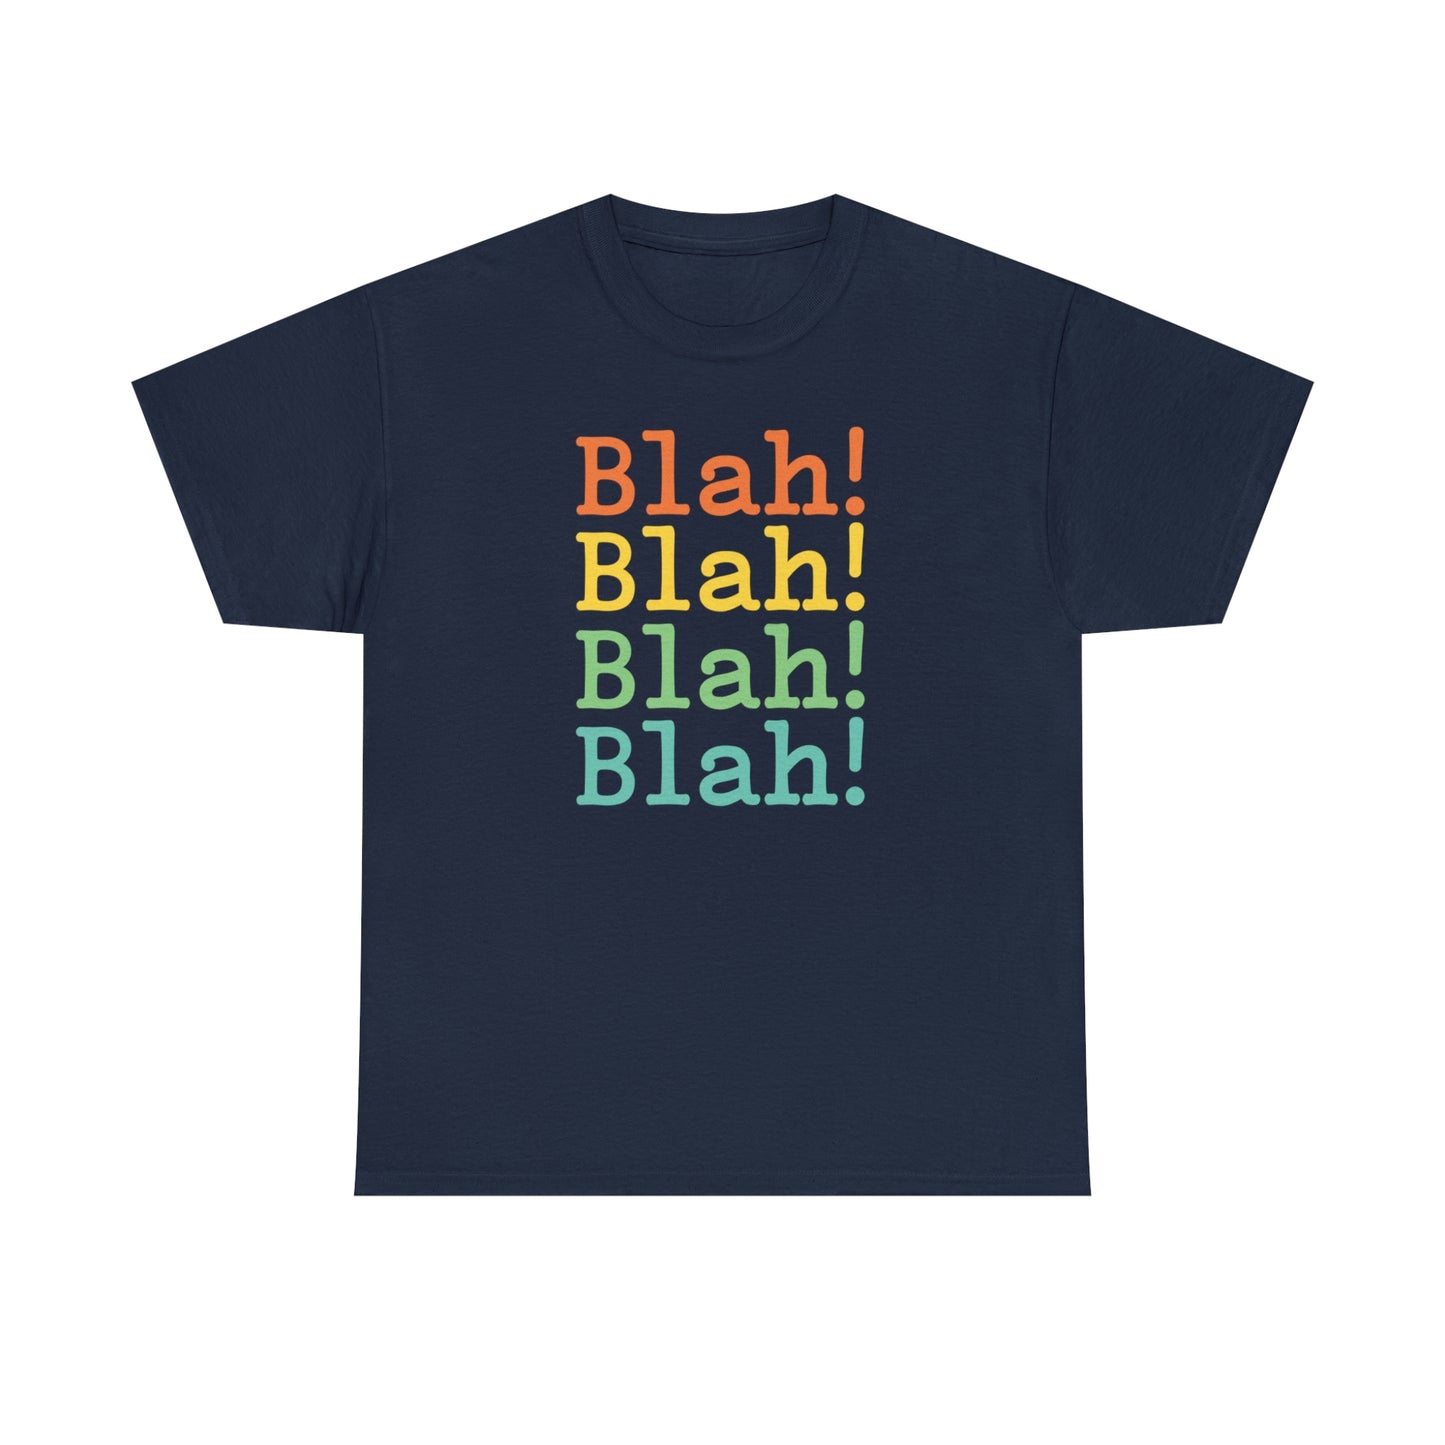 Blah Blah T-Shirt With Sarcastic Comment TShirt Funny Saying T Shirt For Not Listening Shirt For Silly Quote Gift T-Shirt